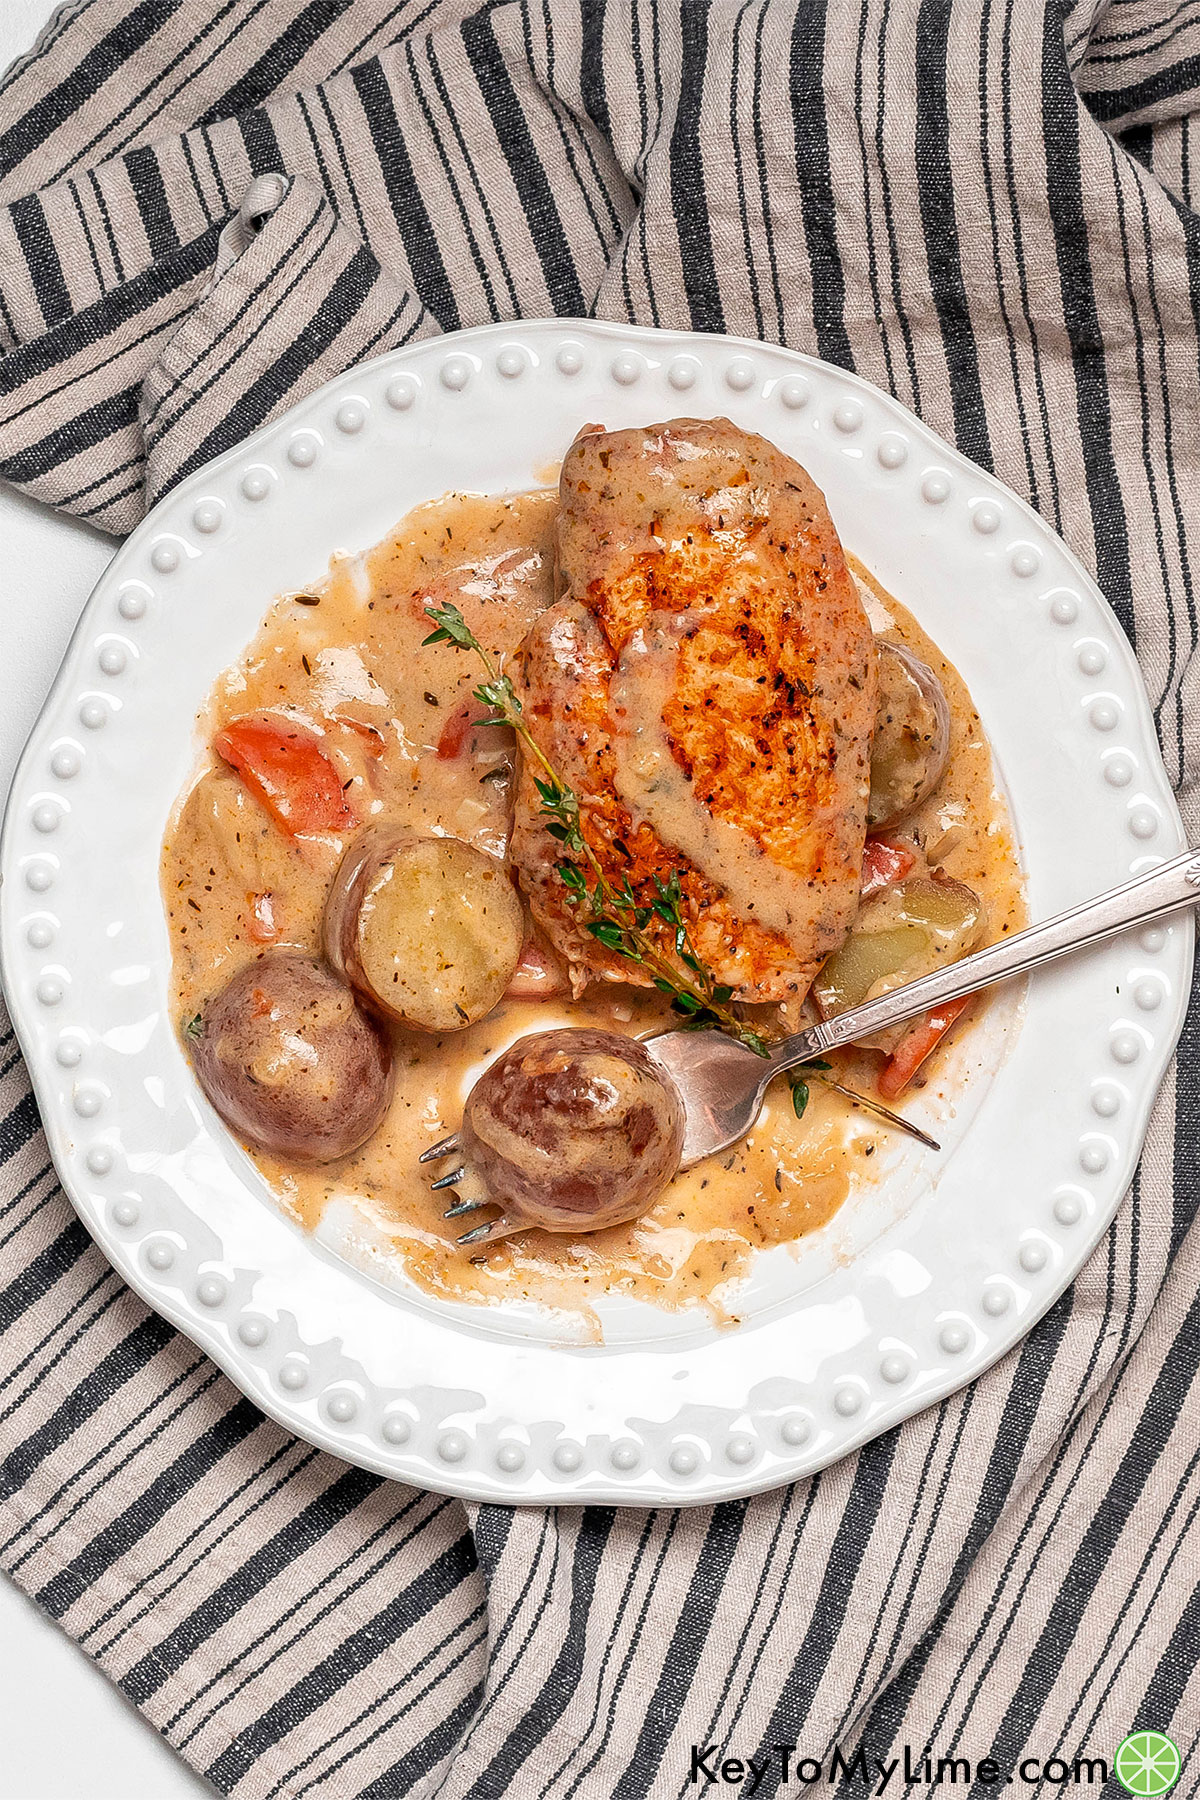 An overhead image of a chicken covered in creamy flavorful sauce with potatoes, carrots, and onions.